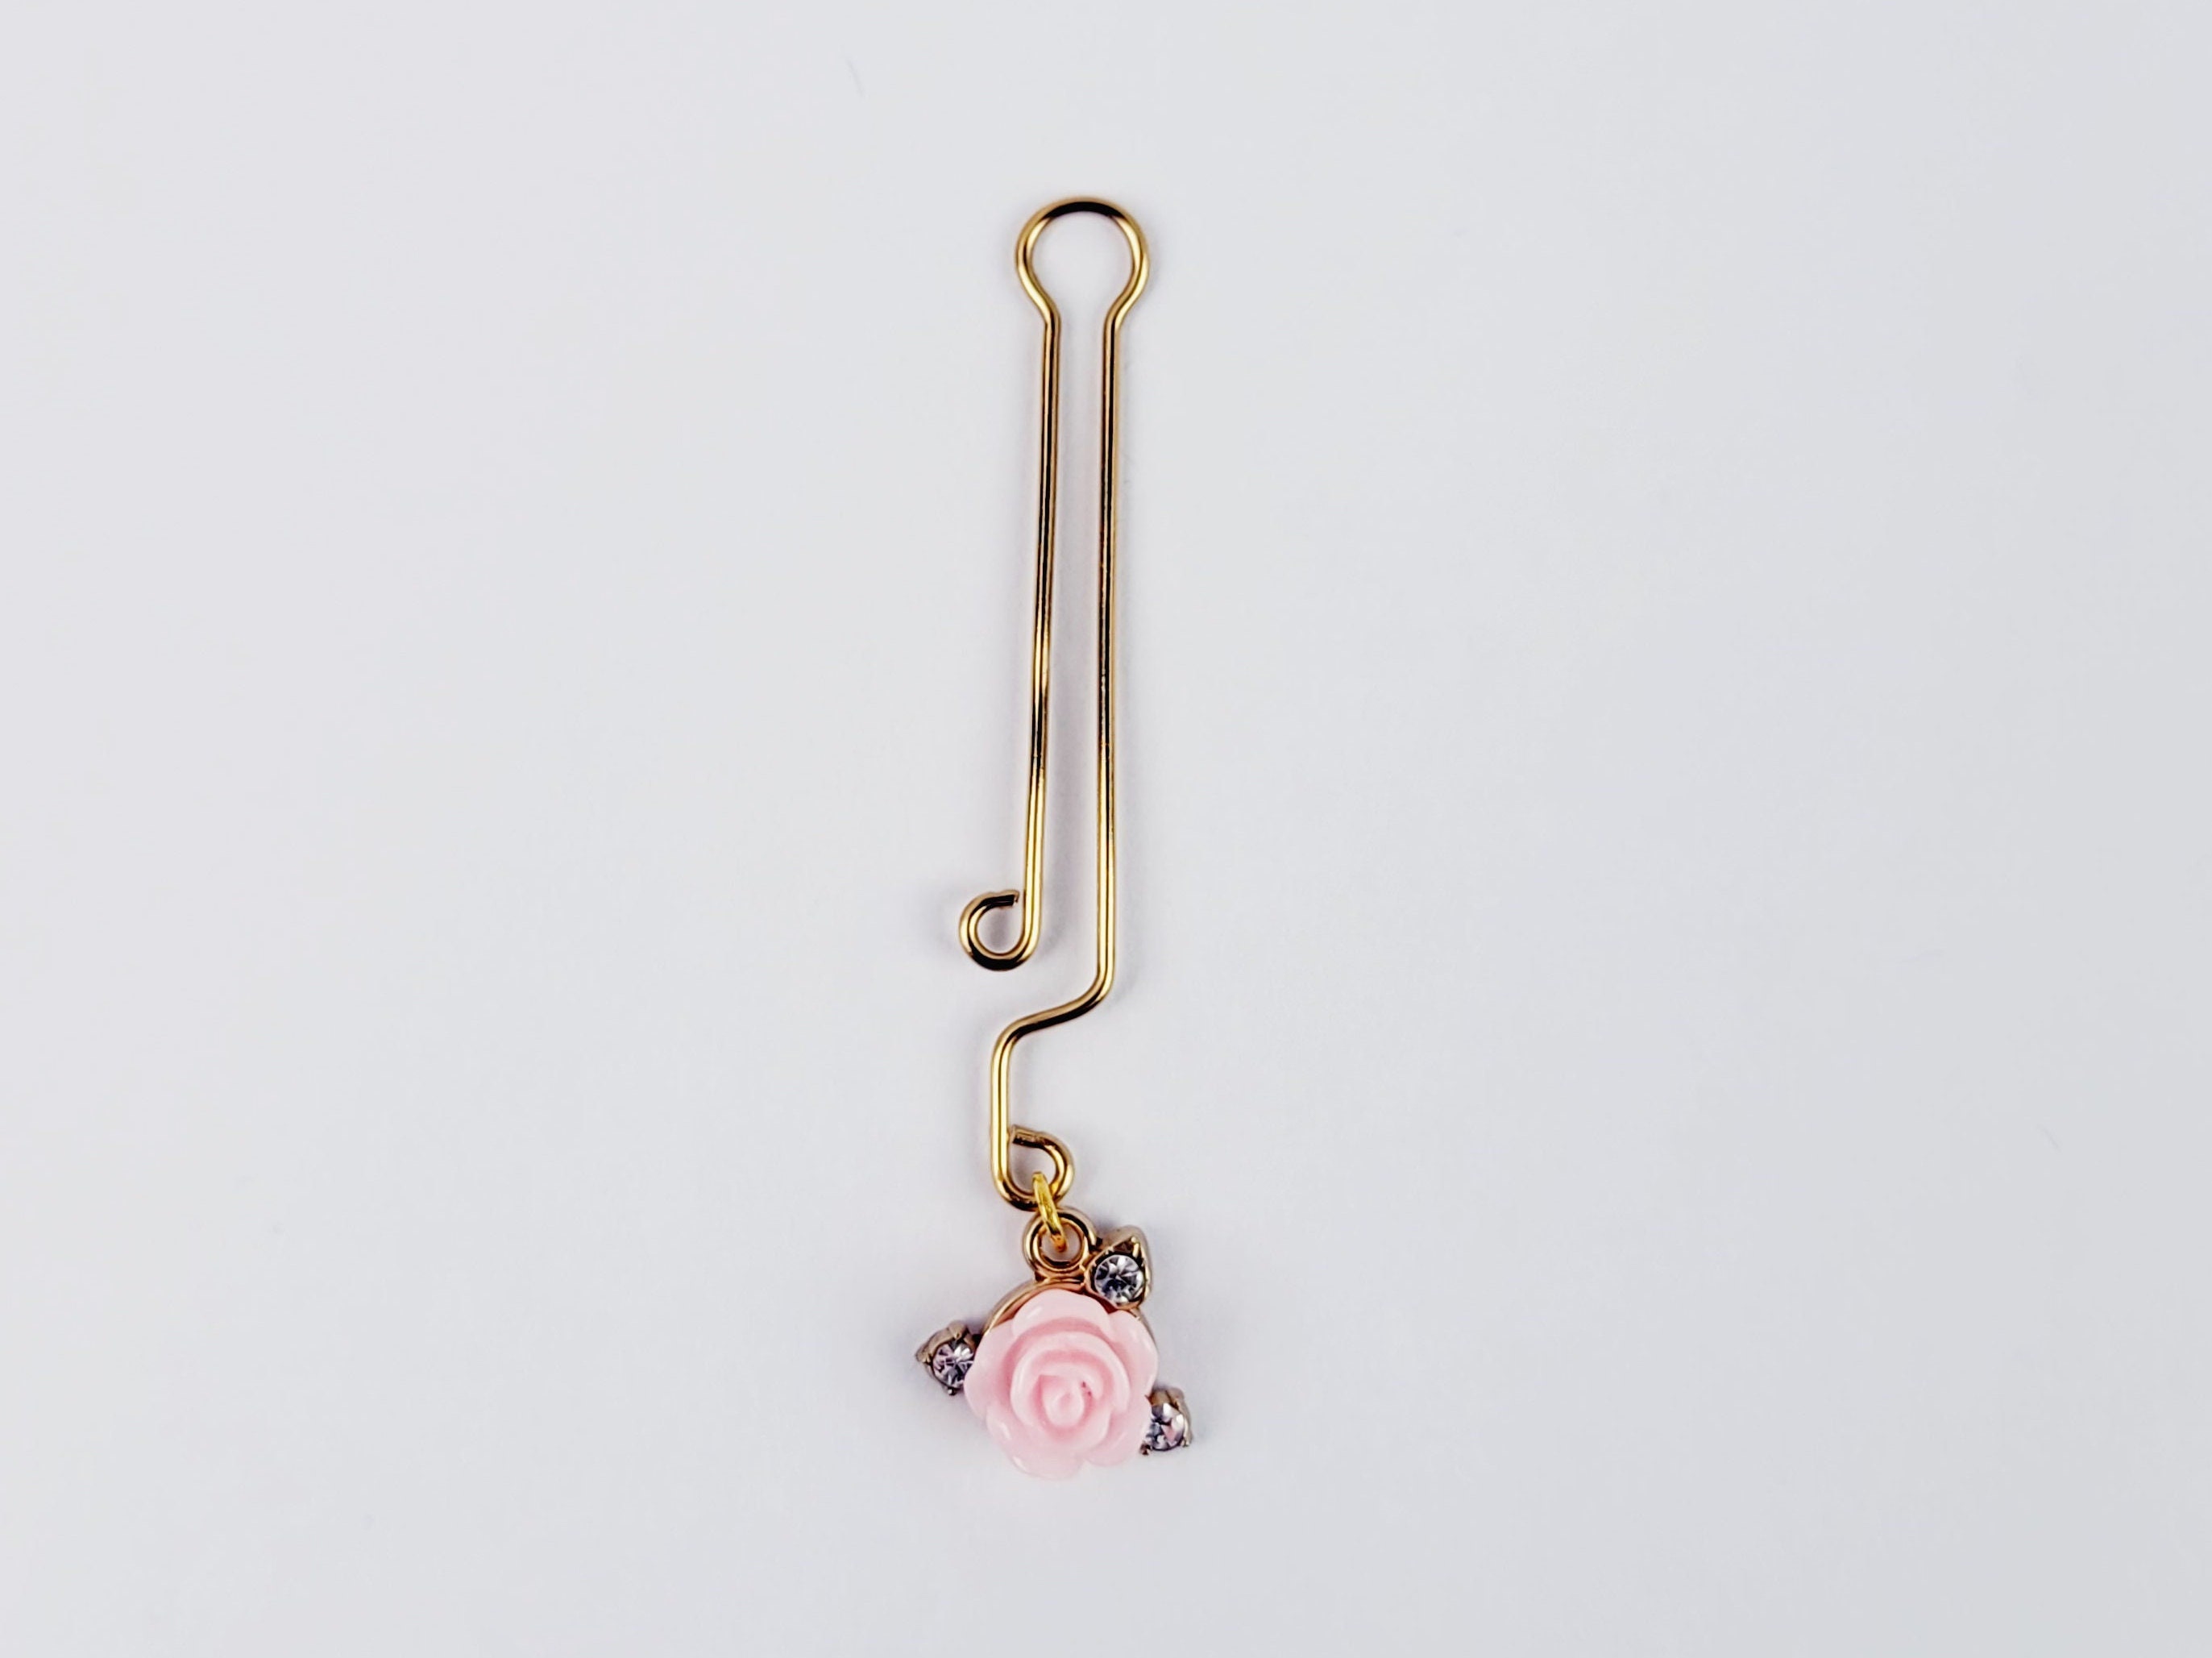 Gold Labia Clip with Pink Rose. Non Piercing Vaginal Labia Jewelry. Mature Listing, BDSM Sex Toy, Submissive, Clitoral Clip photo